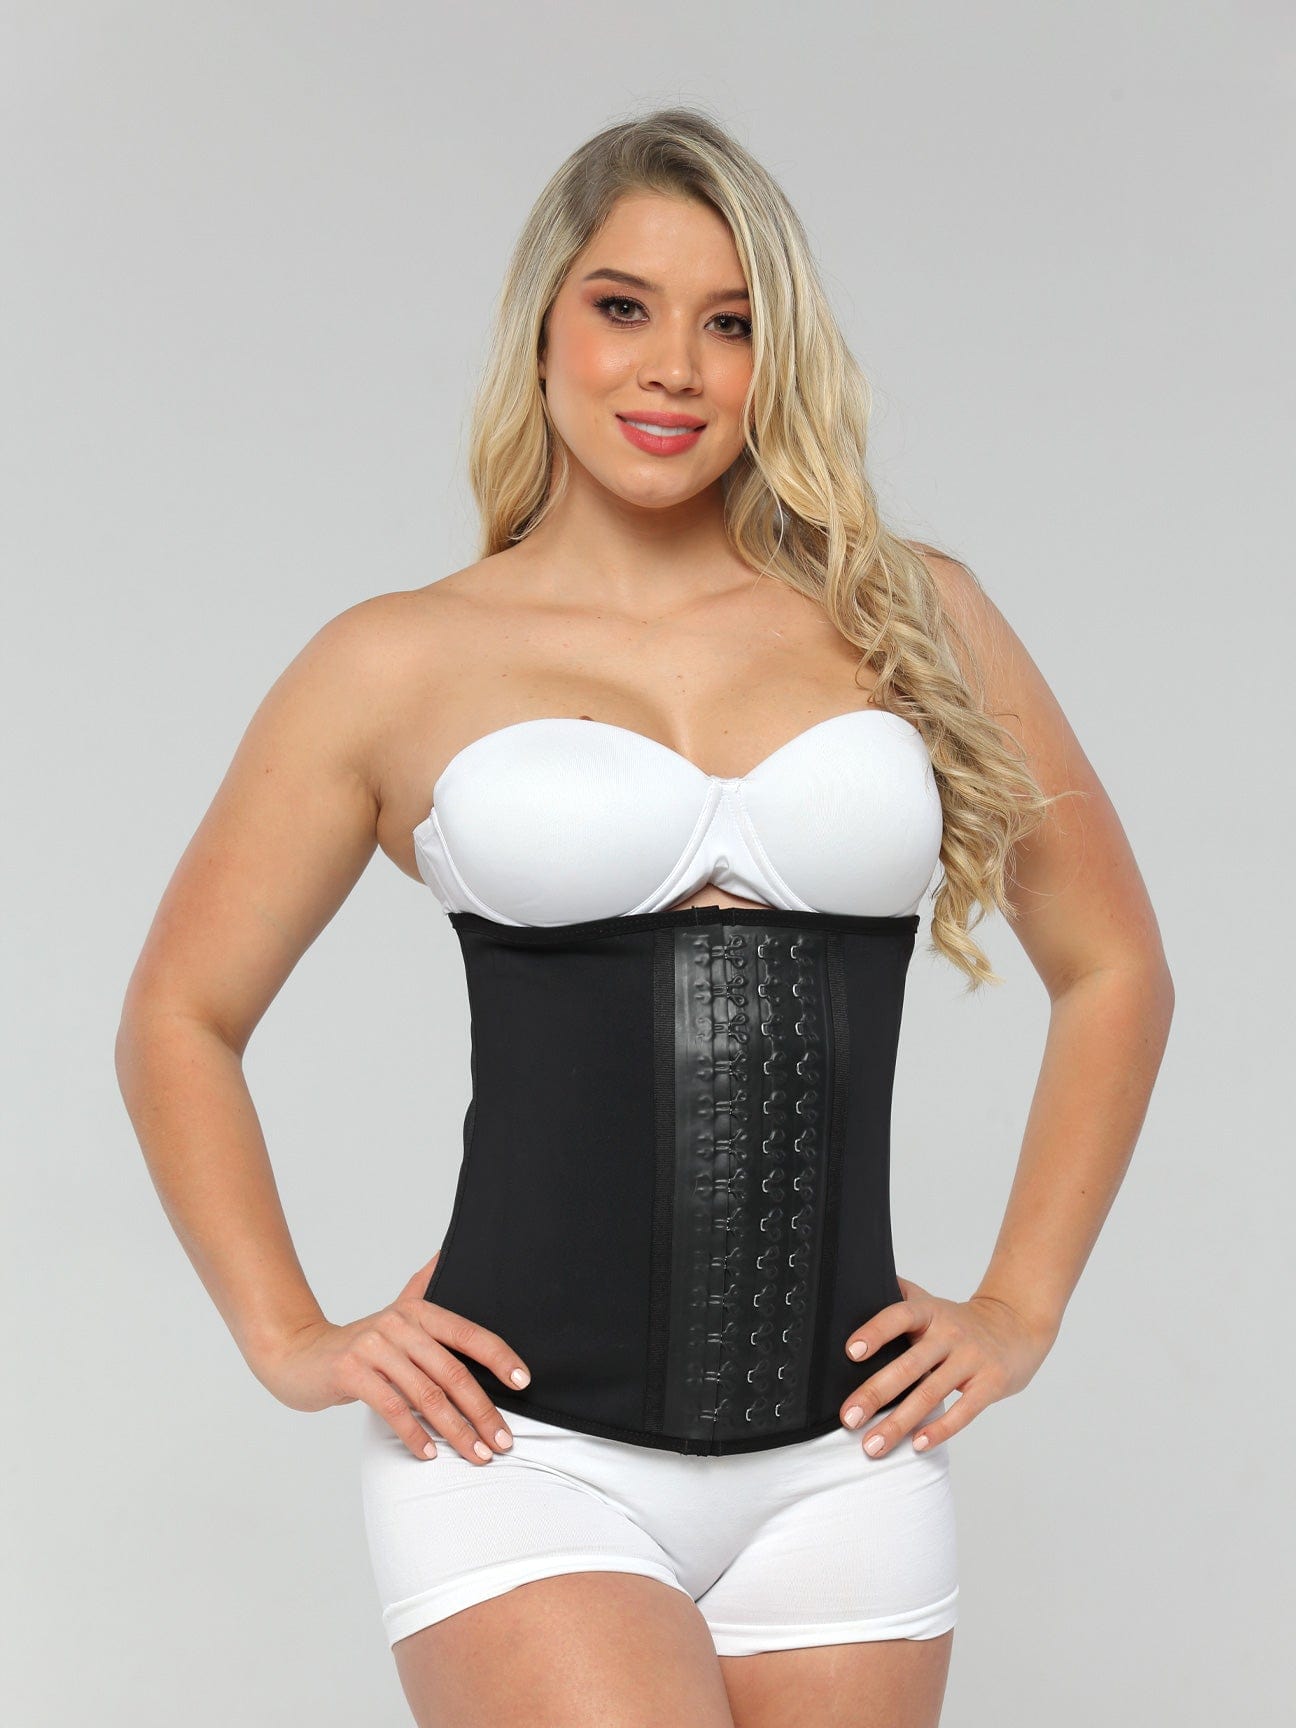 Fajas Binders And Shapers Waist Trainer Corset Butt Lifter Slimming  Underwear Bodyshaper Lingerie Modeling Strap Tummy 210810 From Cong02,  $21.93